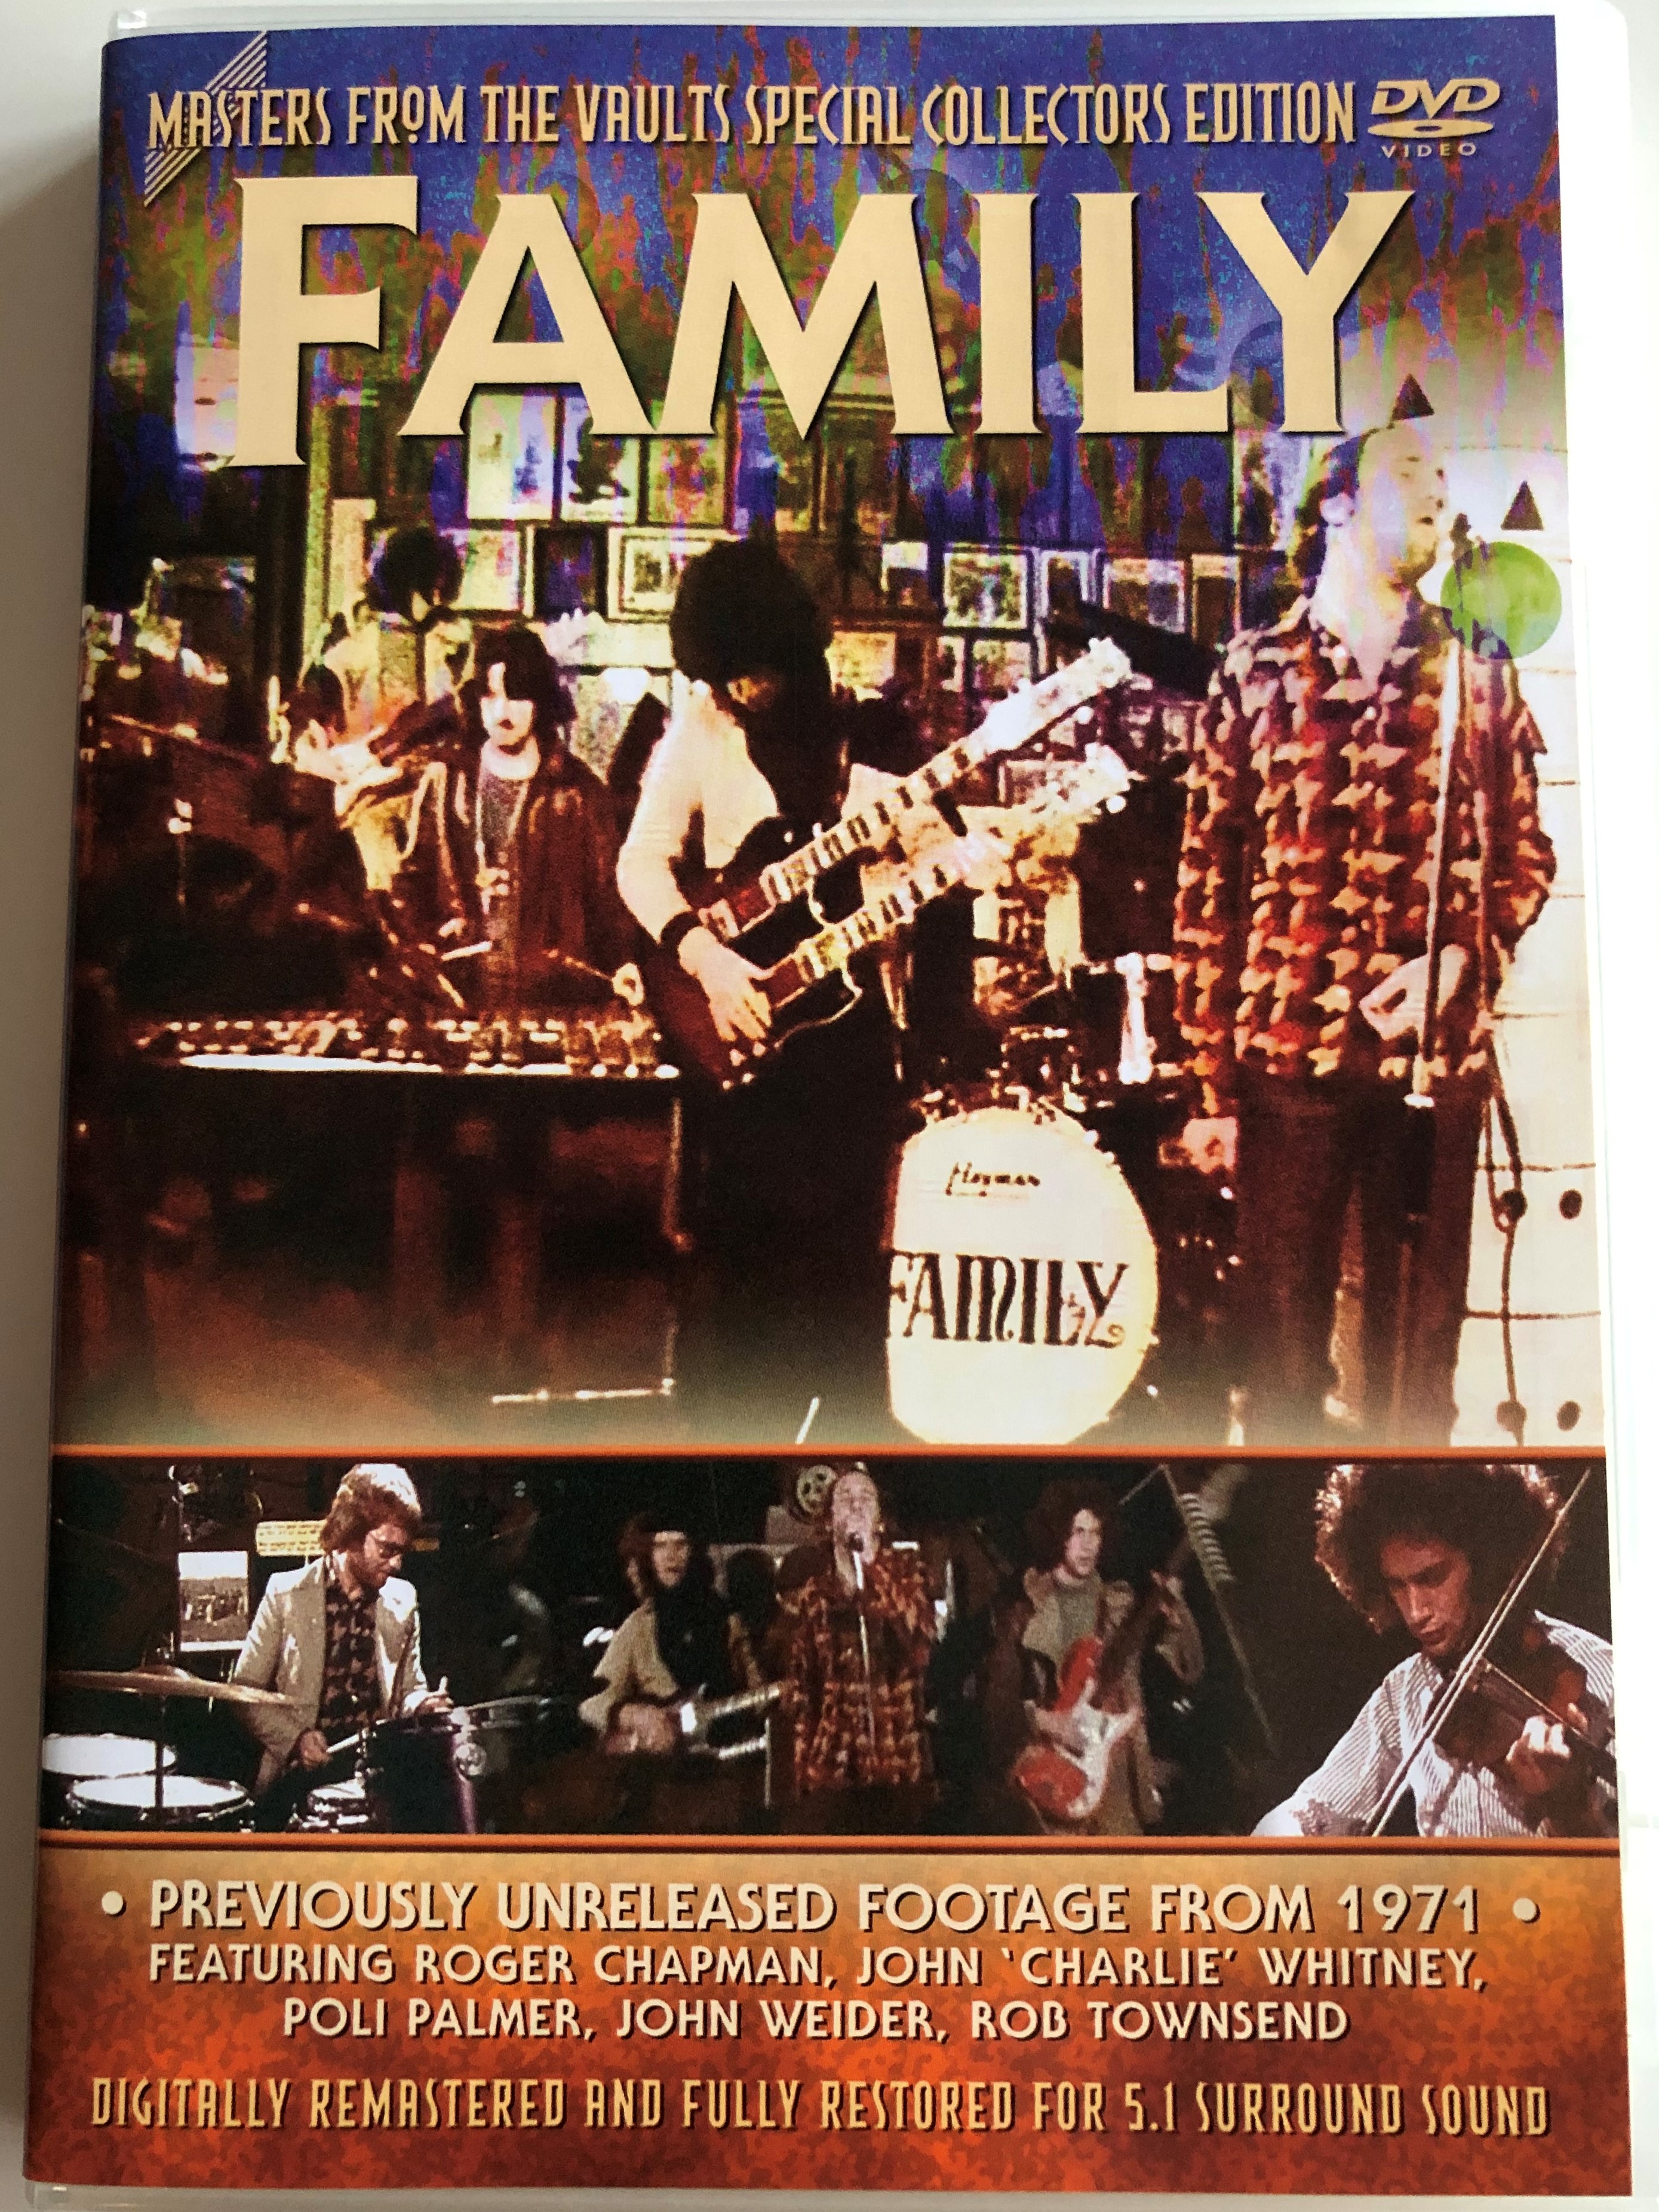 Family - Masters from the Vaults special Collectors Edition DVD 1.JPG